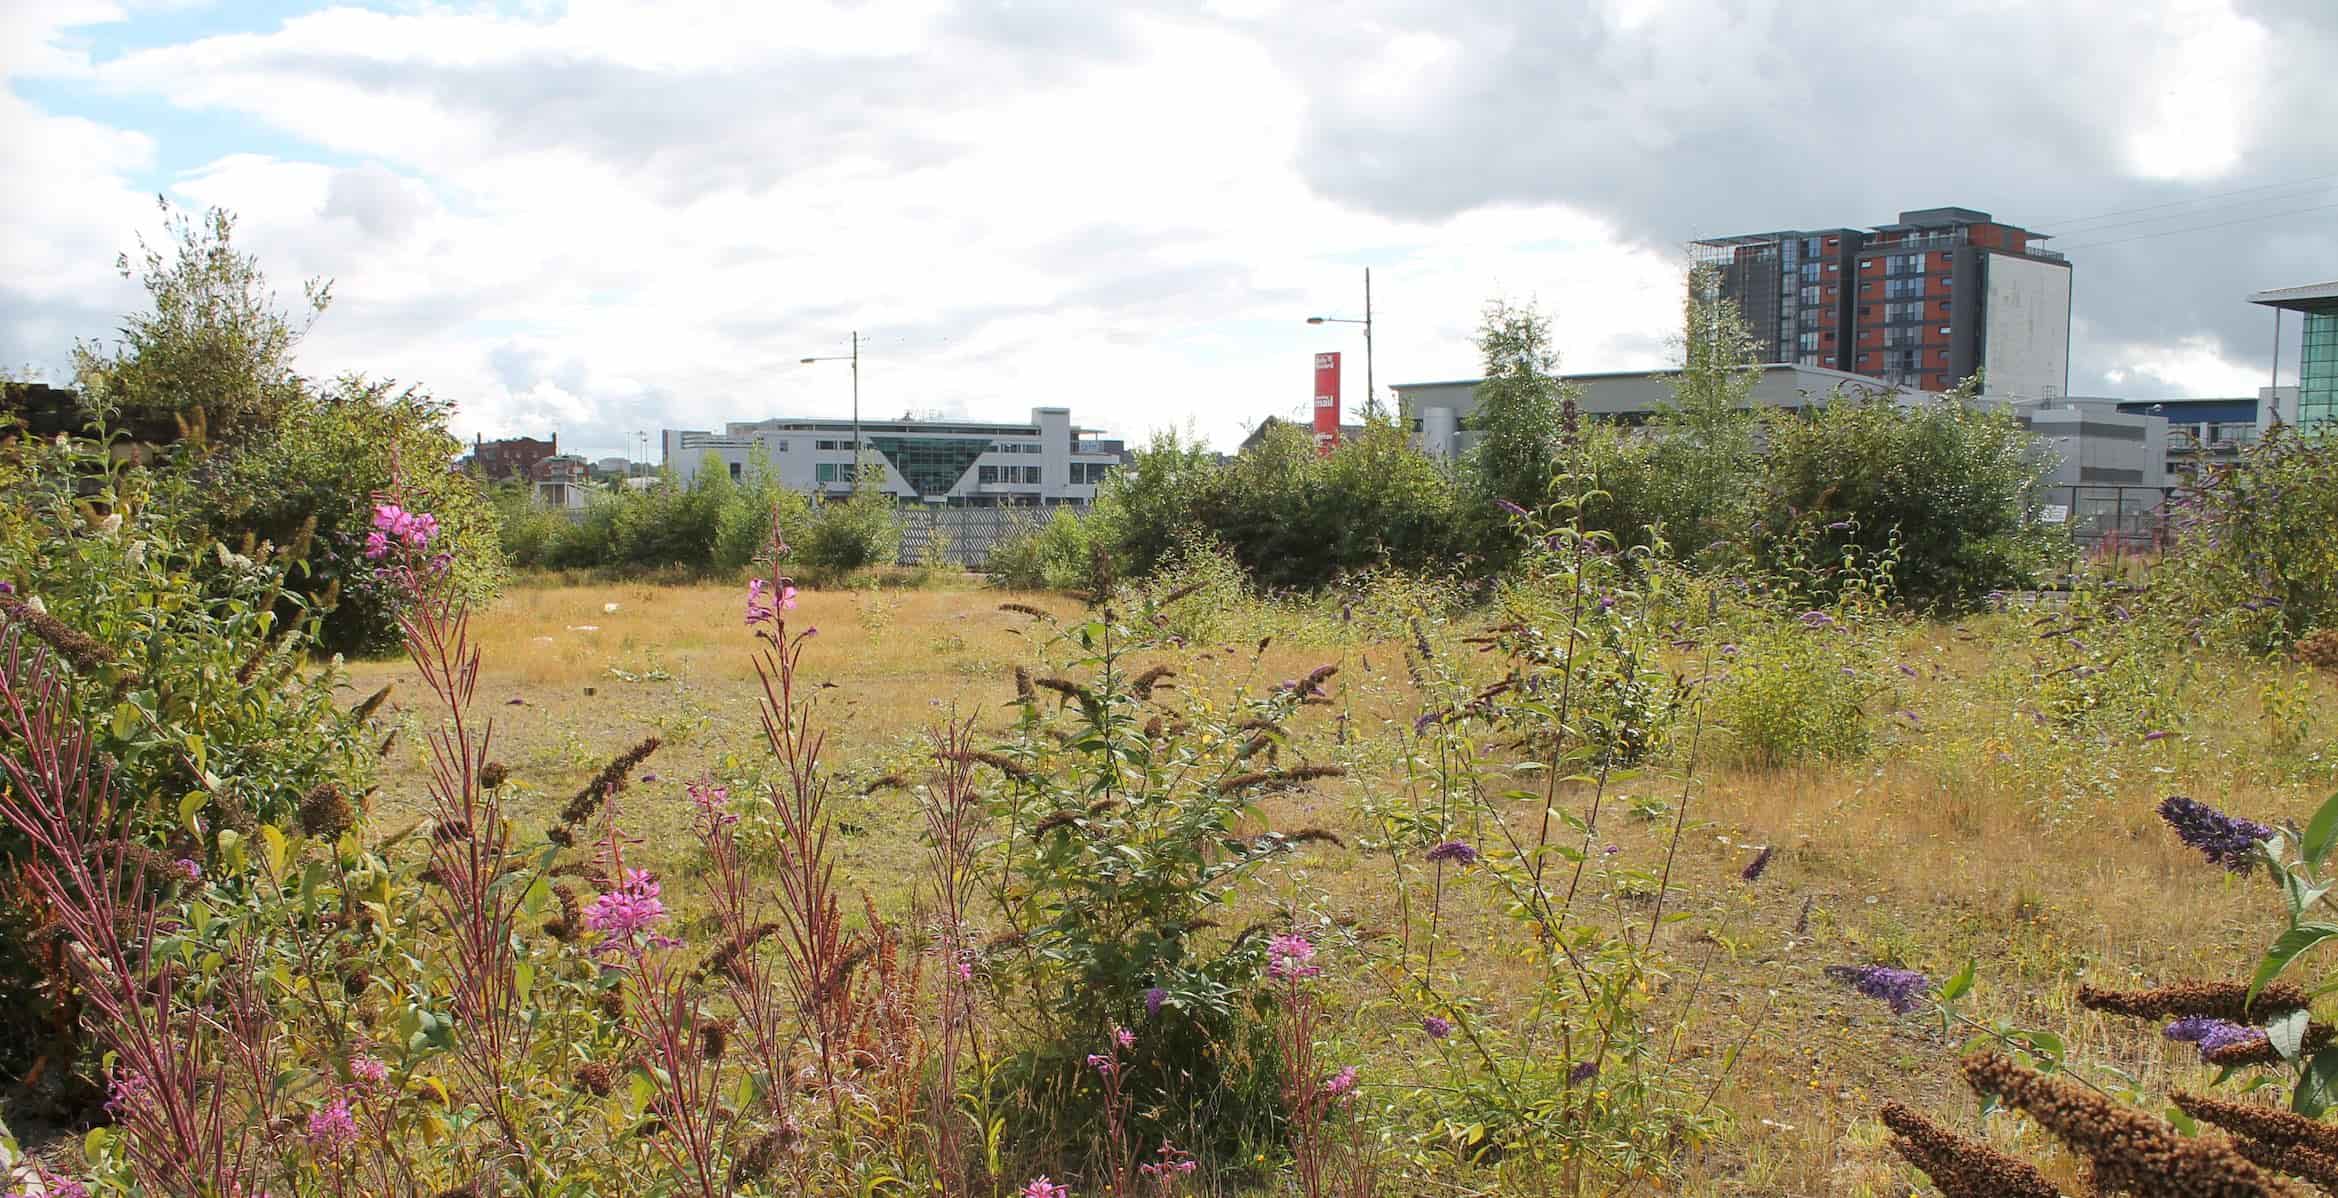 Vacant plot of land surrounded by flowers, bushes, grass and buildings around it.